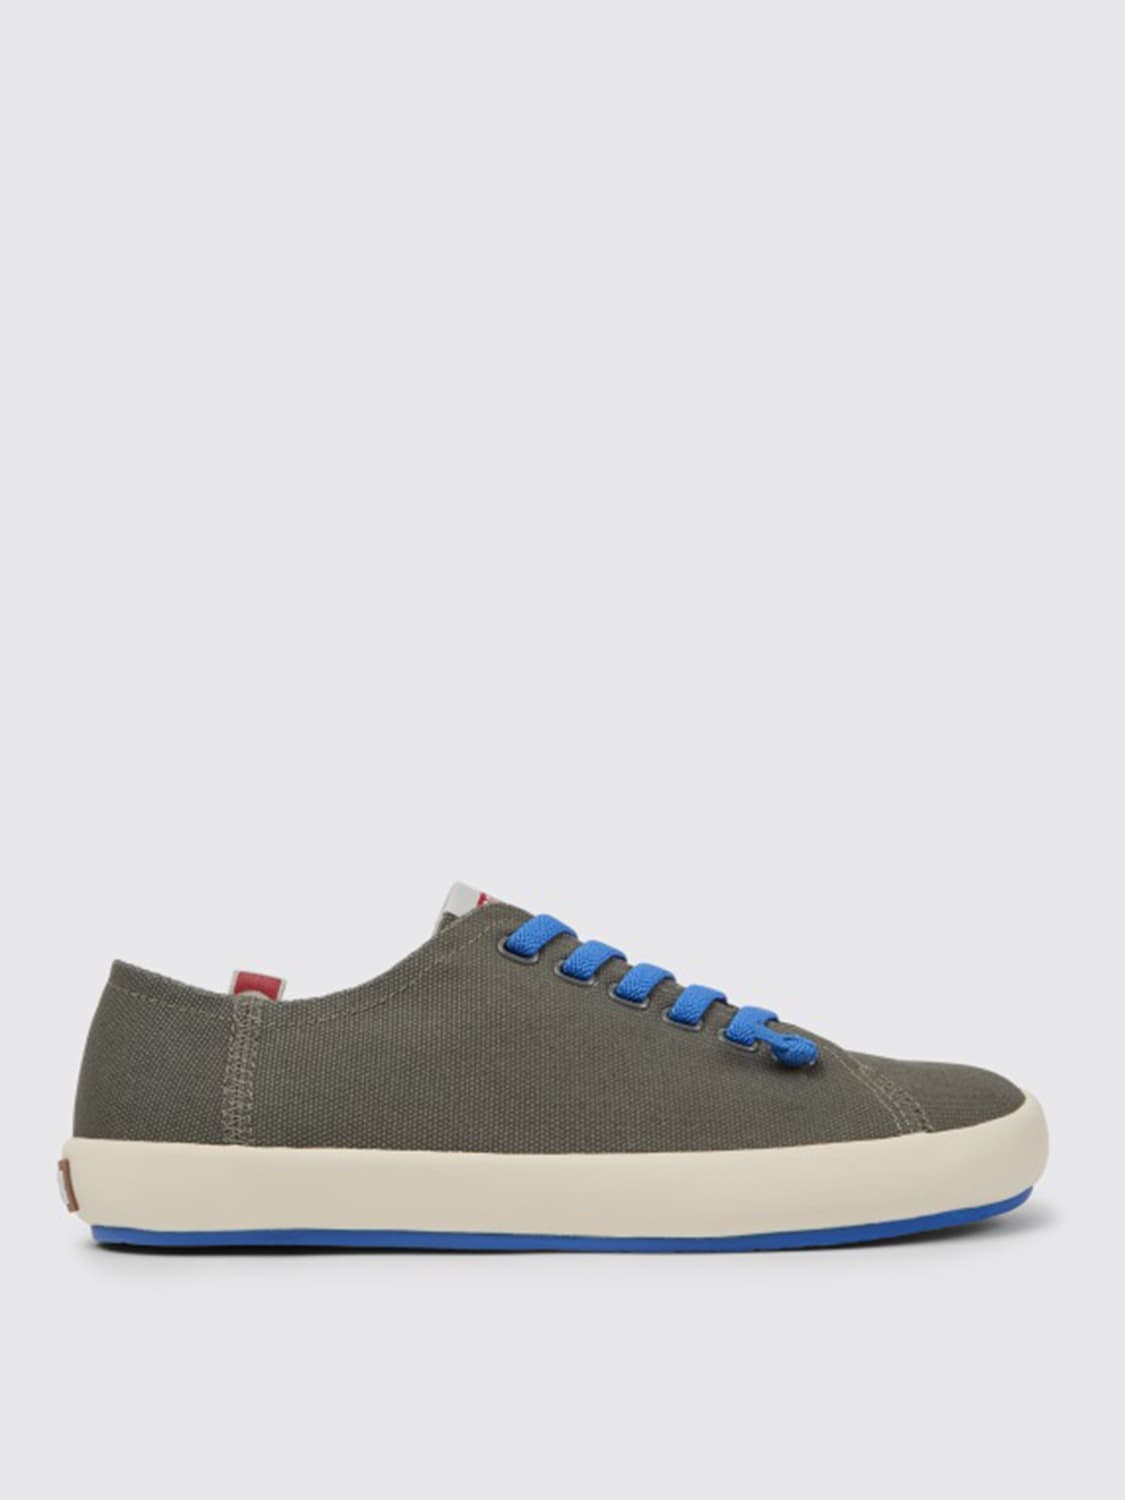 Camper Outlet: Peu Rambla sneakers recycled cotton - Grey | Camper sneakers 18869-085 PEU RAMBLA on GIGLIO.COM